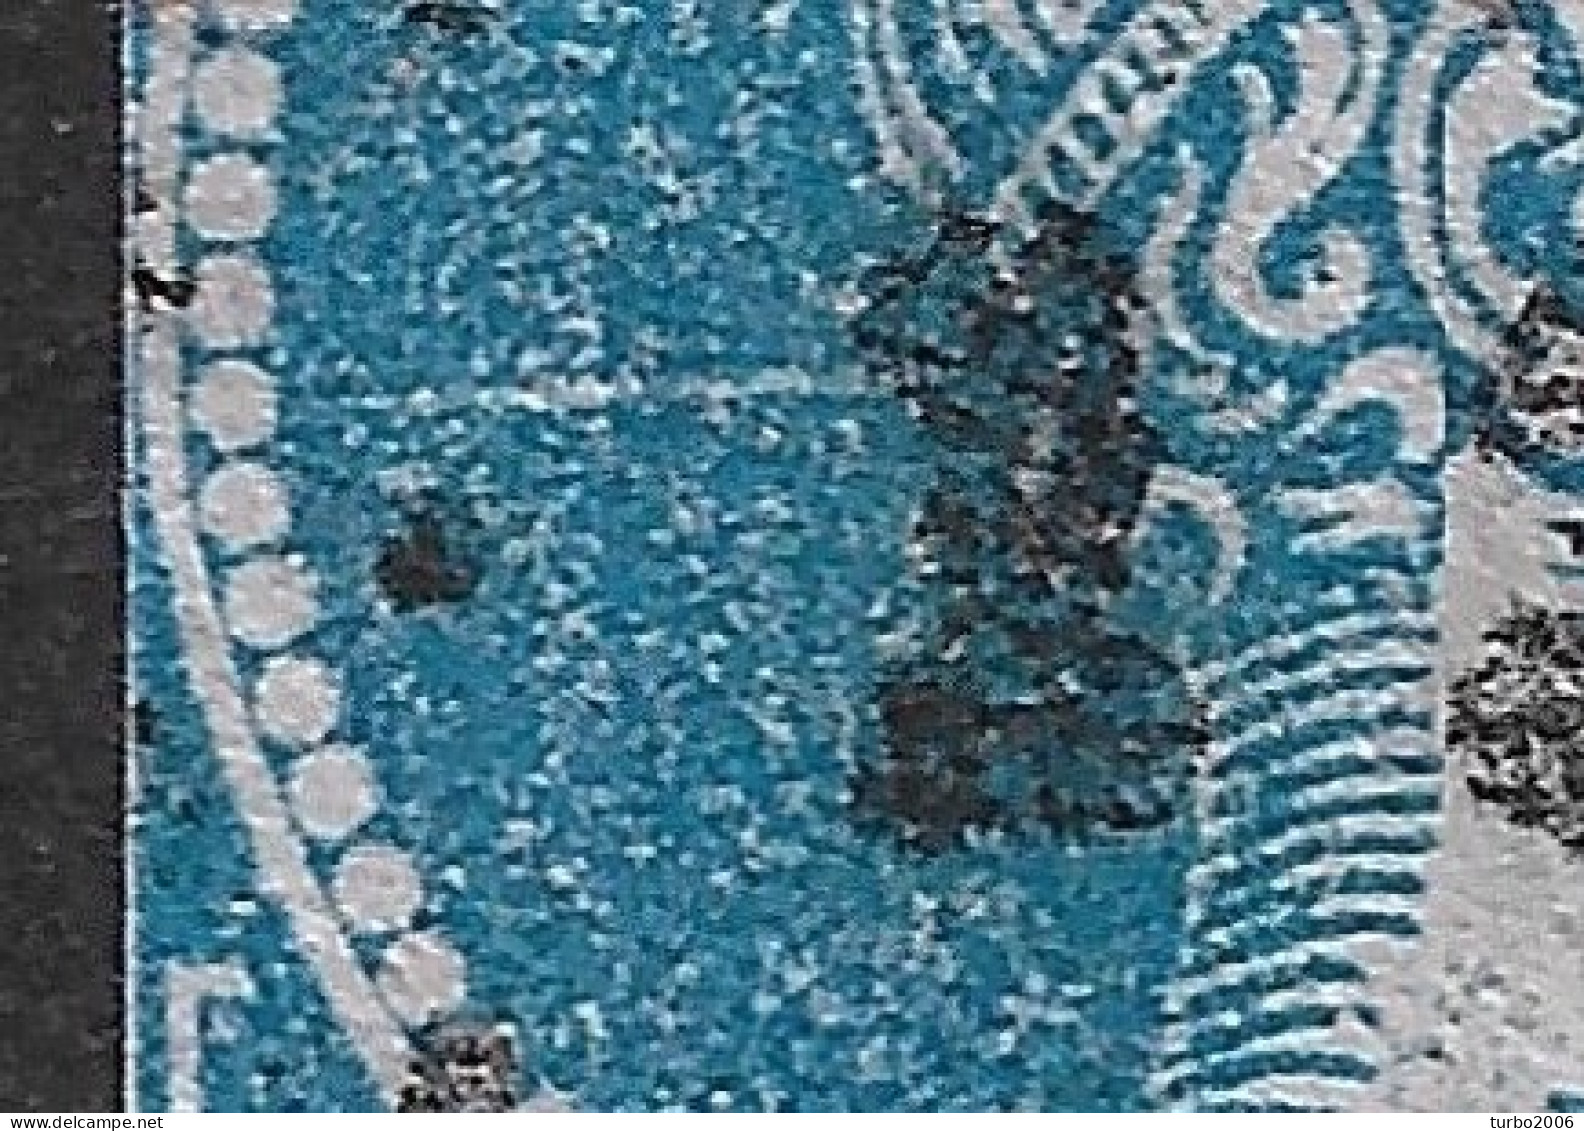 GREECE Plateflaw White Line (20F20) In 1868-69 Large Hermes Head Cleaned Plates Issue 20 L Sky Blue Vl. 39 / H 27 A - Variedades Y Curiosidades